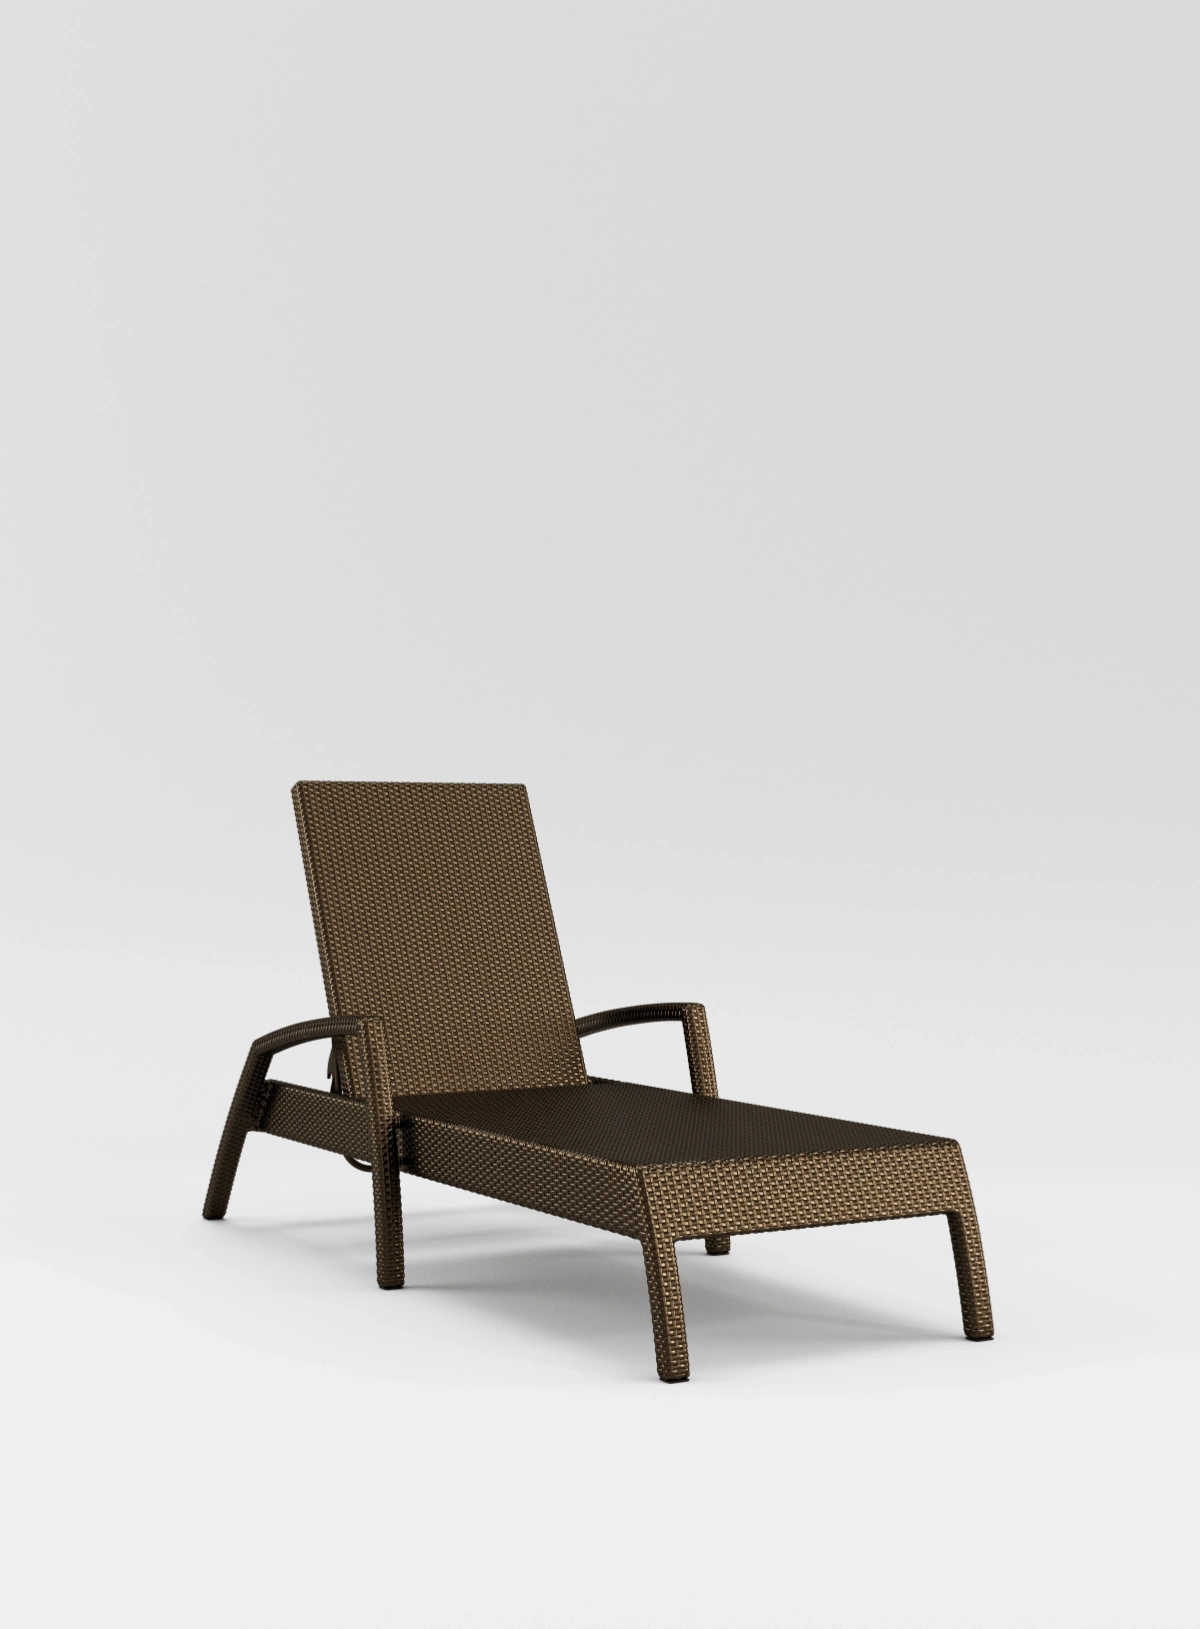 Jordan View - Brown All Chaise Lounges